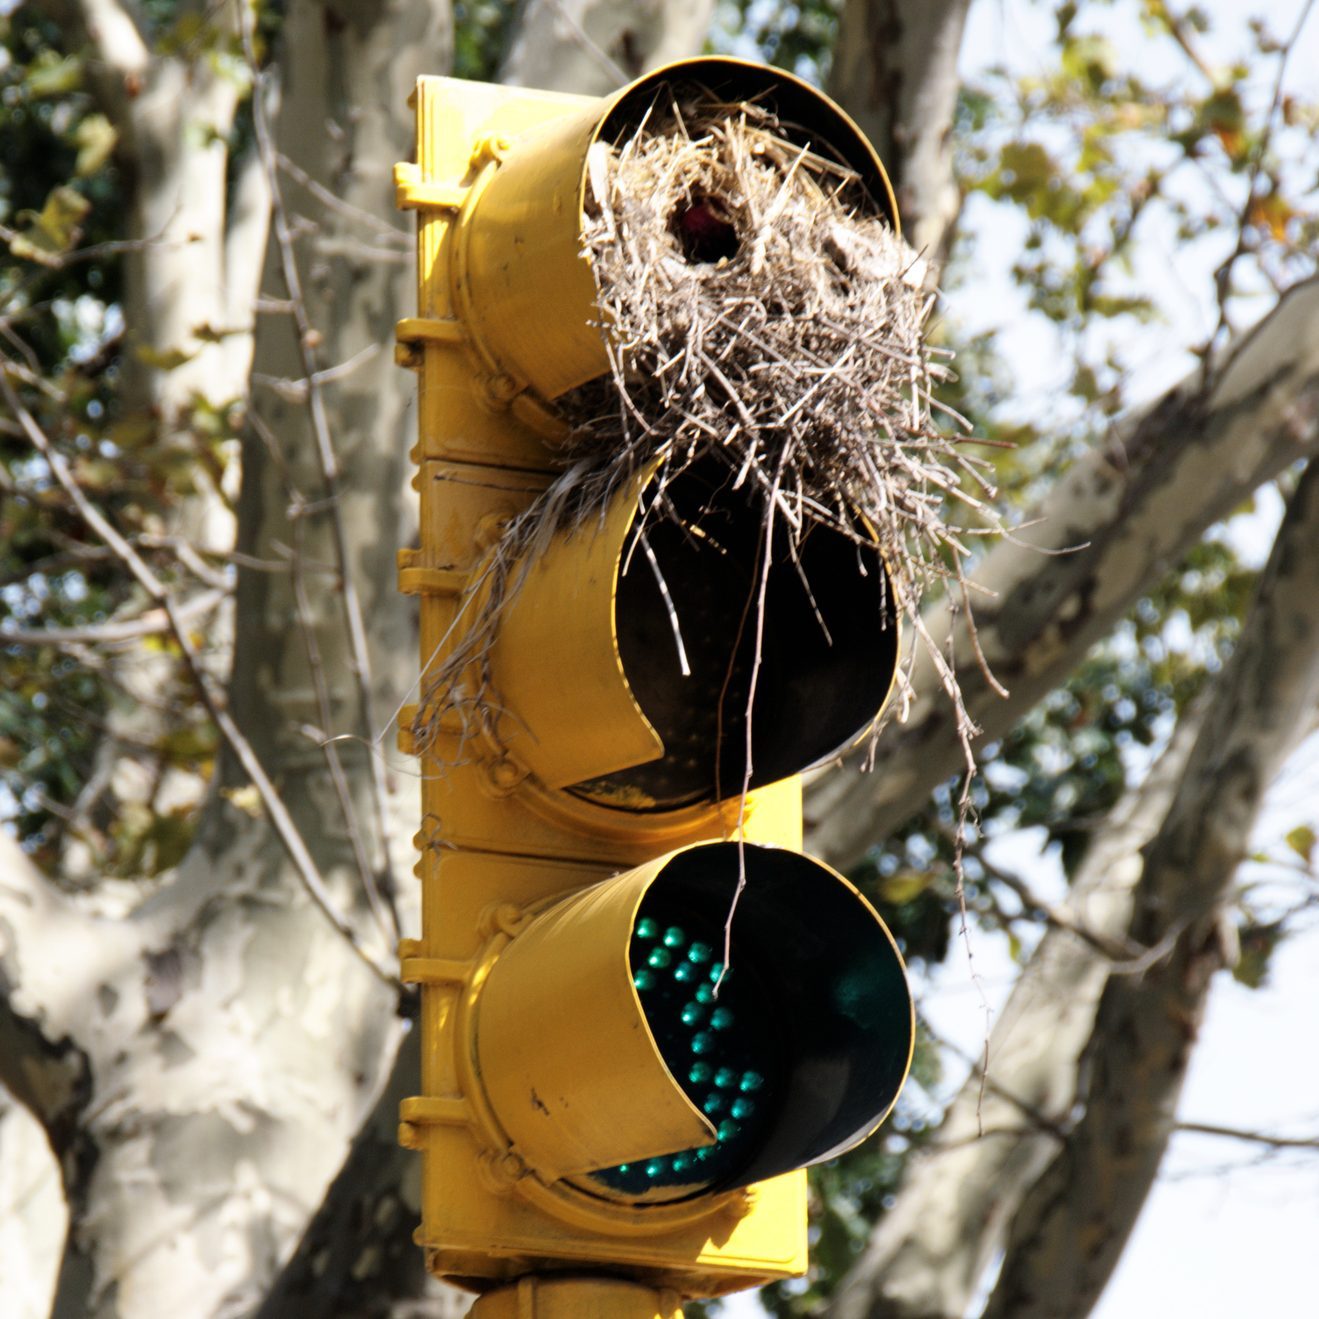 8 Ways To Stop Birds From Nesting Around Your Home